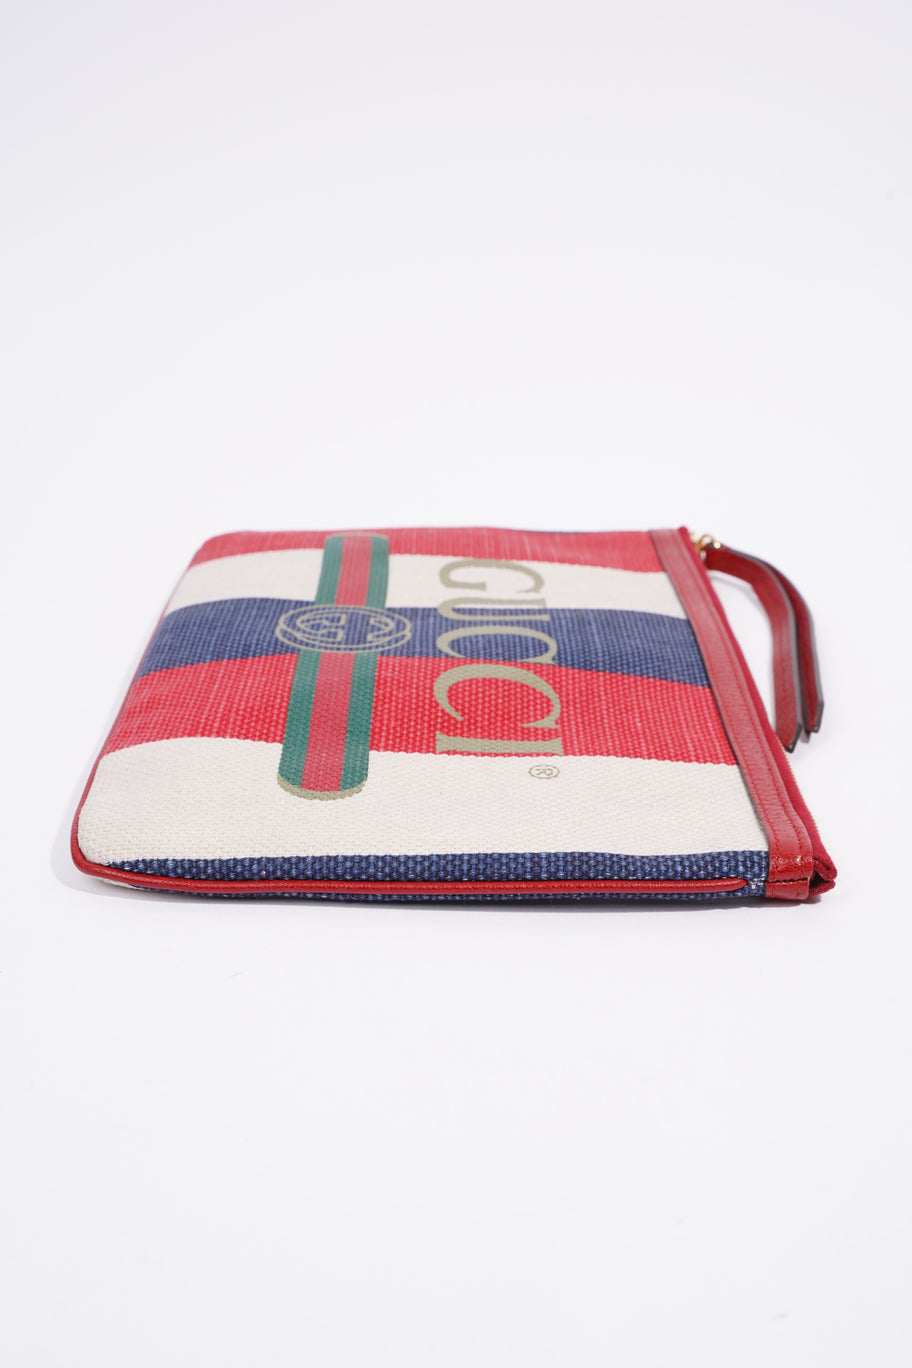 Clutch Red / White / Blue Canvas Image 3